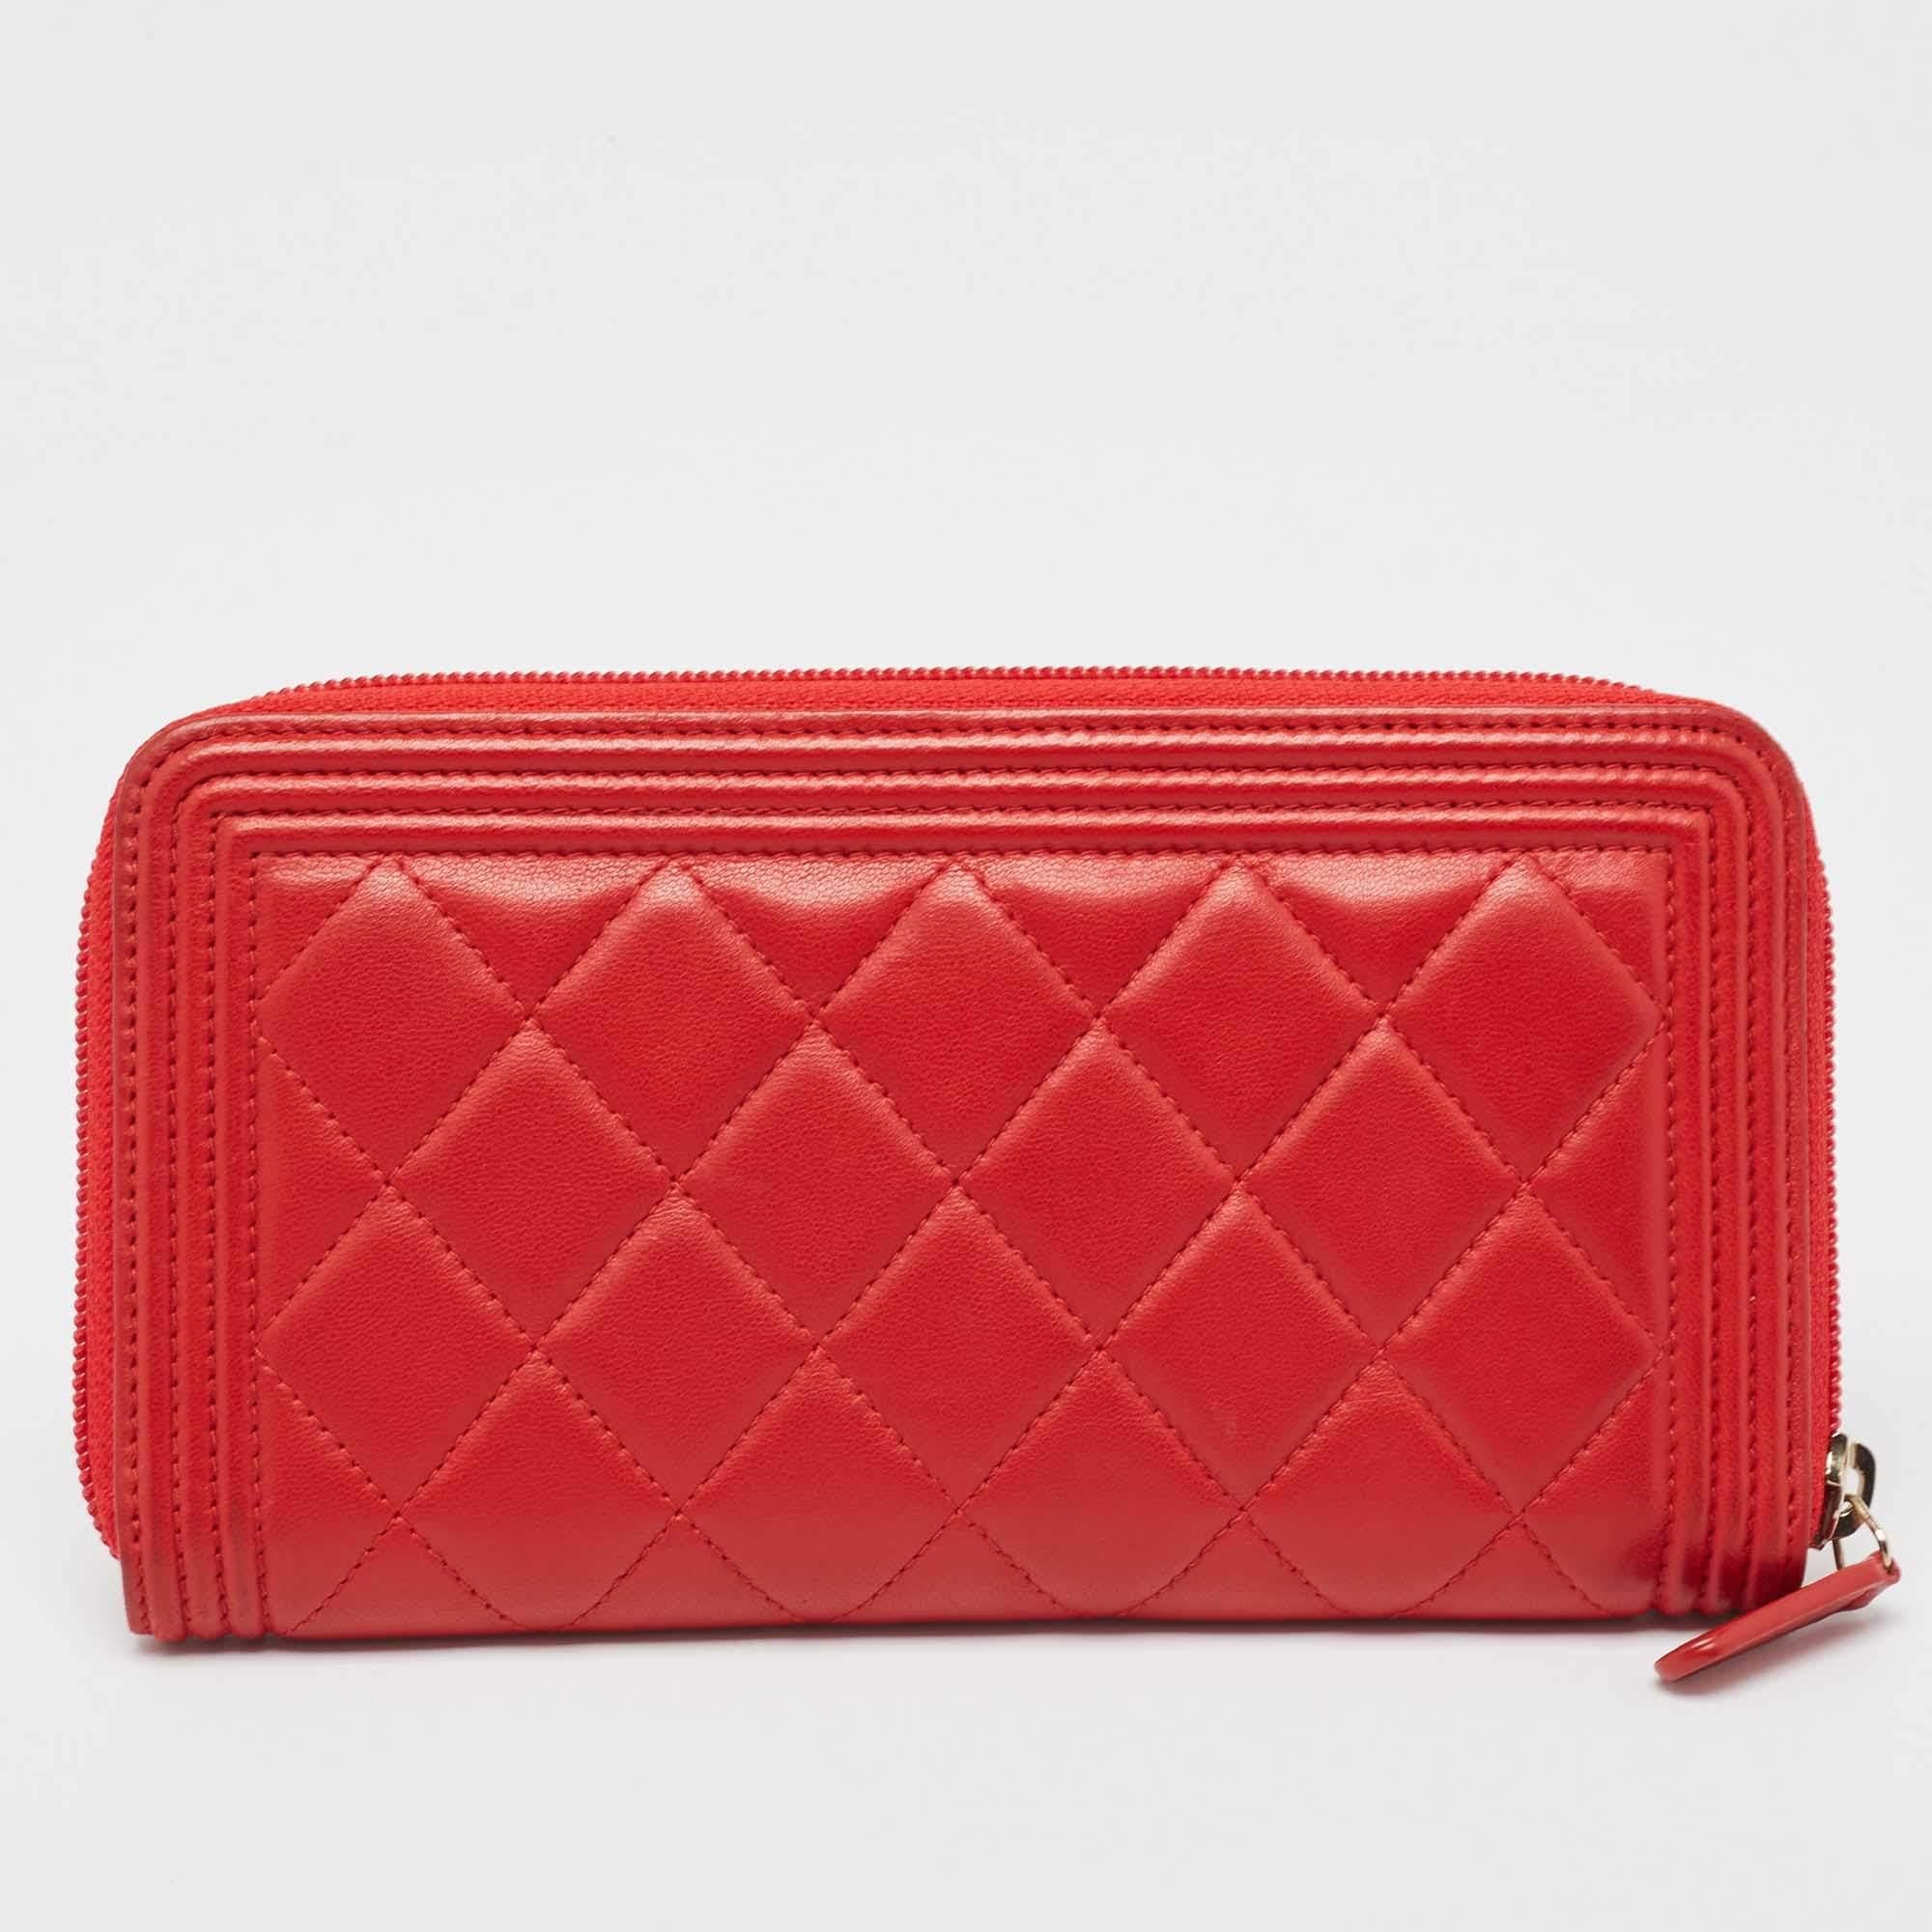 This wallet is conveniently designed for everyday use. It comes with a well-structured interior for you to neatly arrange your cards and cash. This stylish piece is complete with a sleek appeal.

Includes: Original Dustbag

